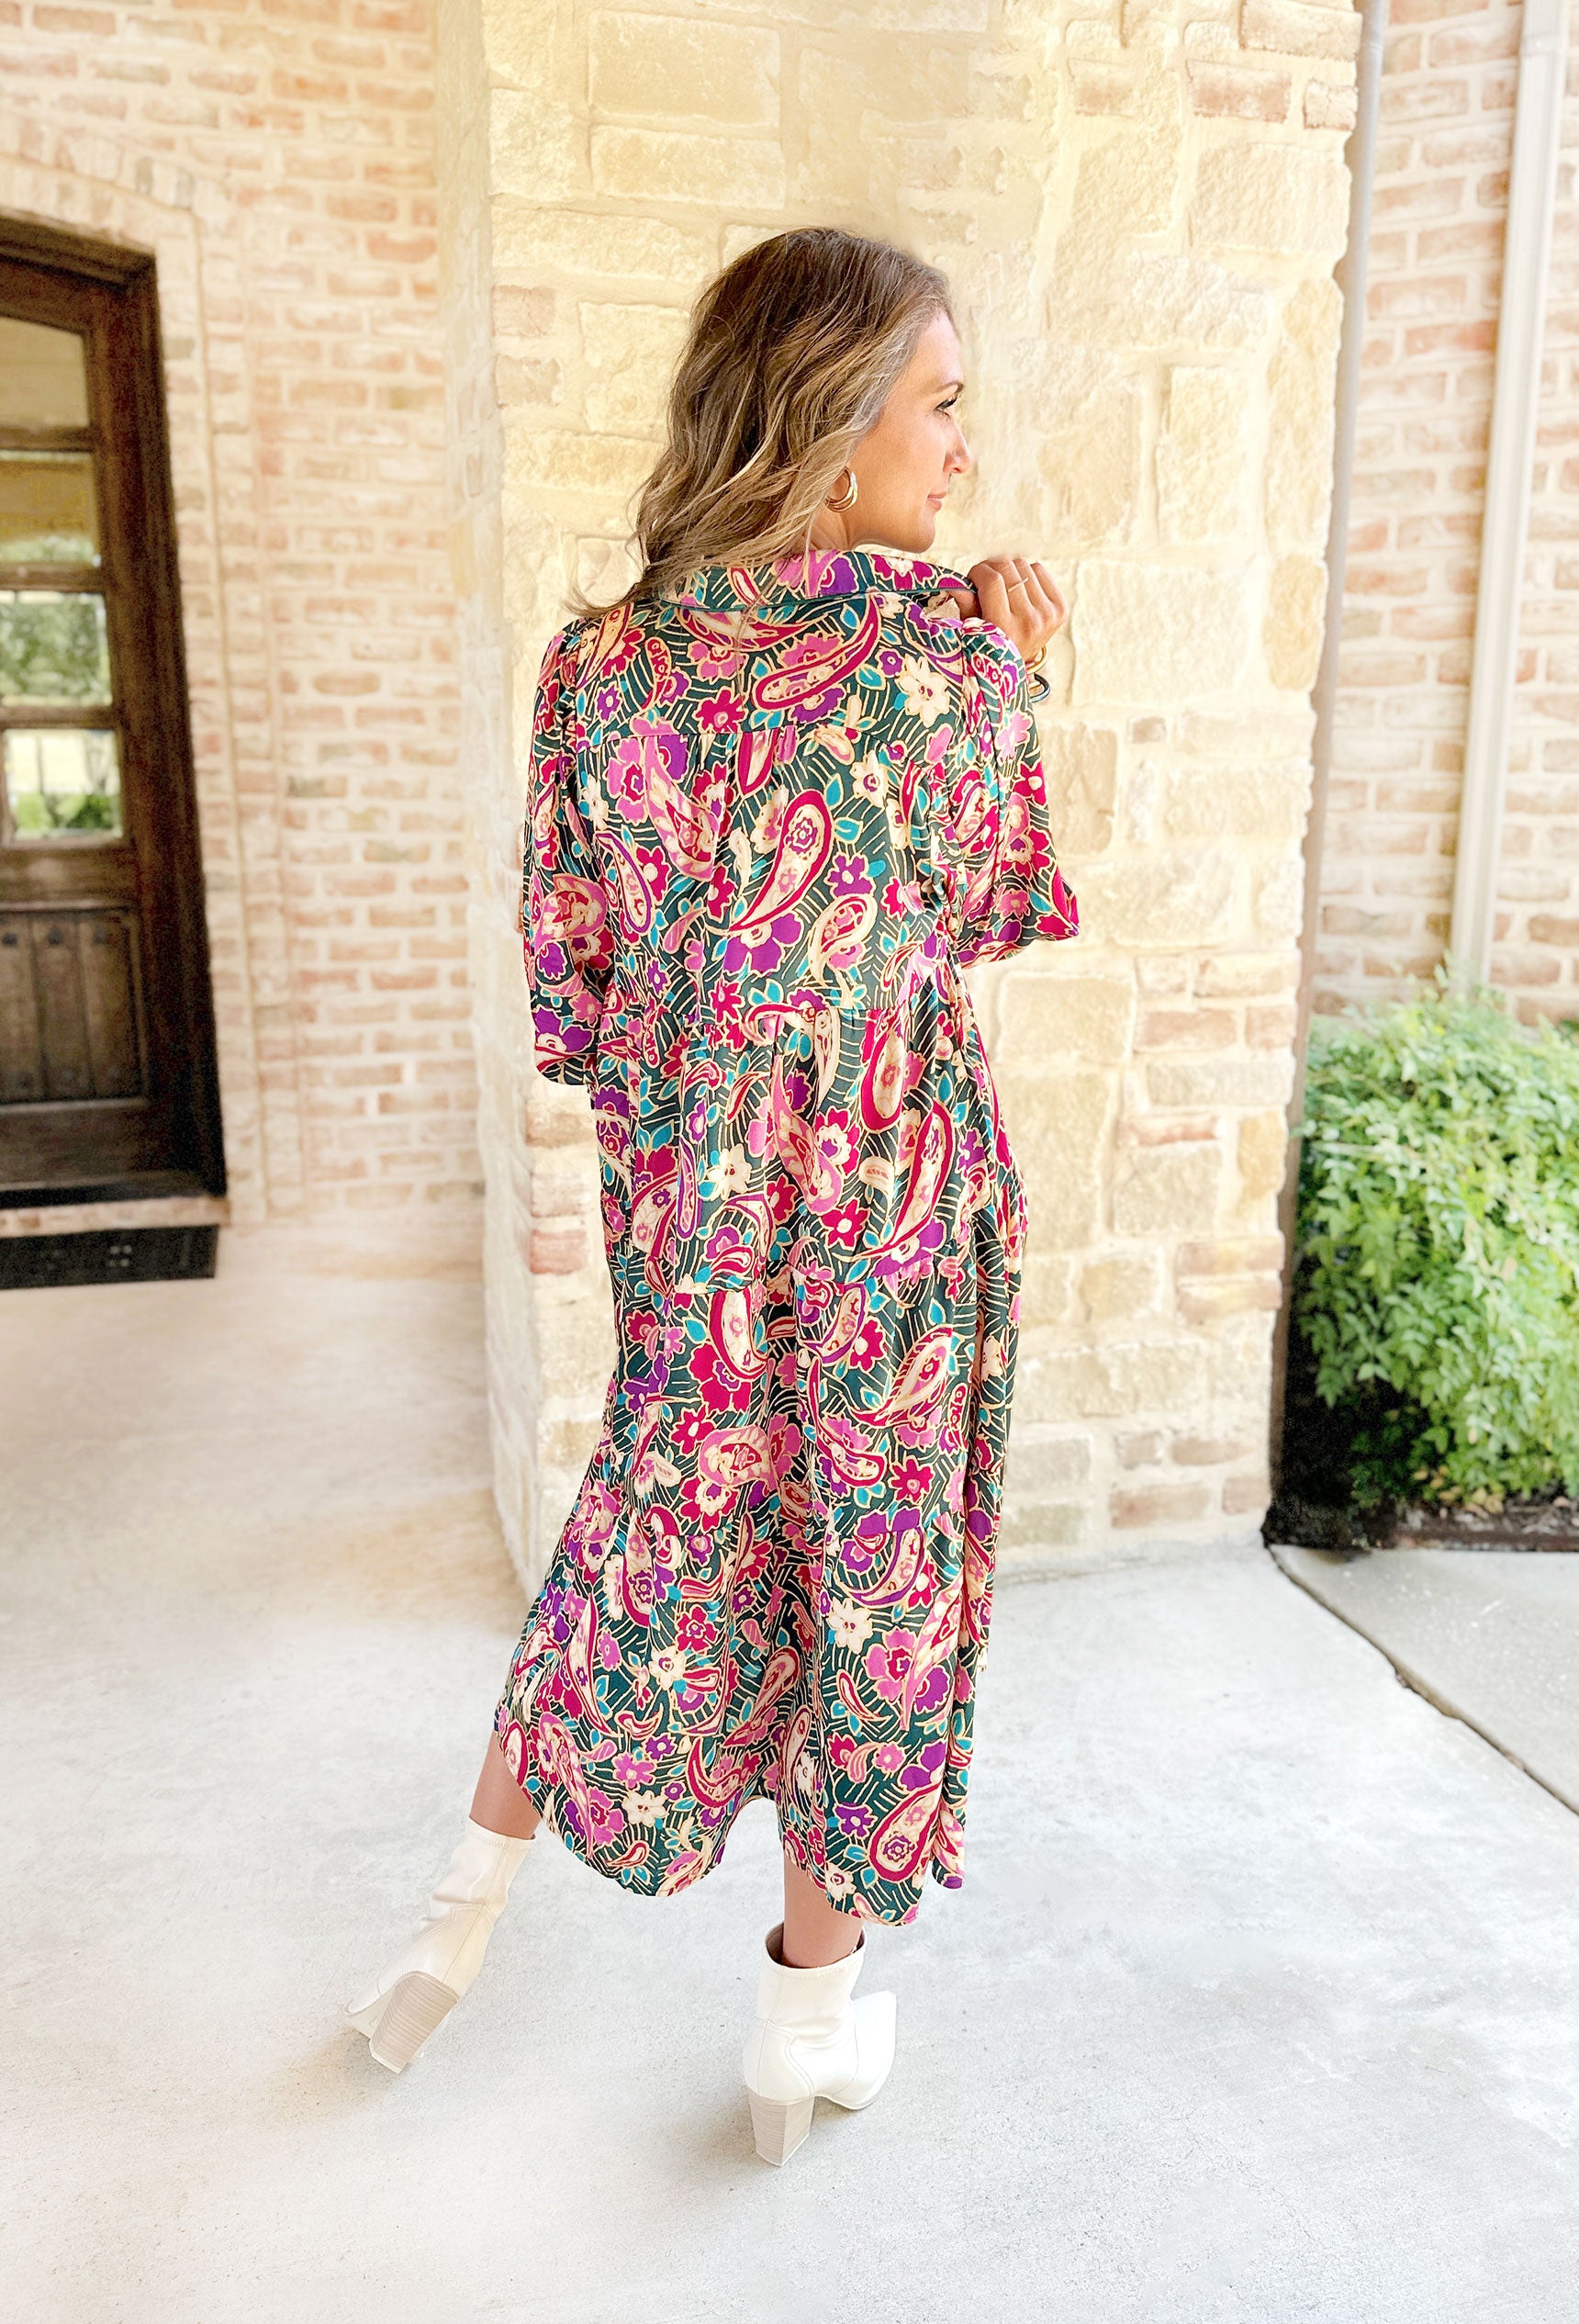 Sonoma Sways Midi Dress, paisley printed midi dress with soft v-neck and quarter length sleeves. Colors are magenta, fuchsia, teal, gold, cranberry, forest green